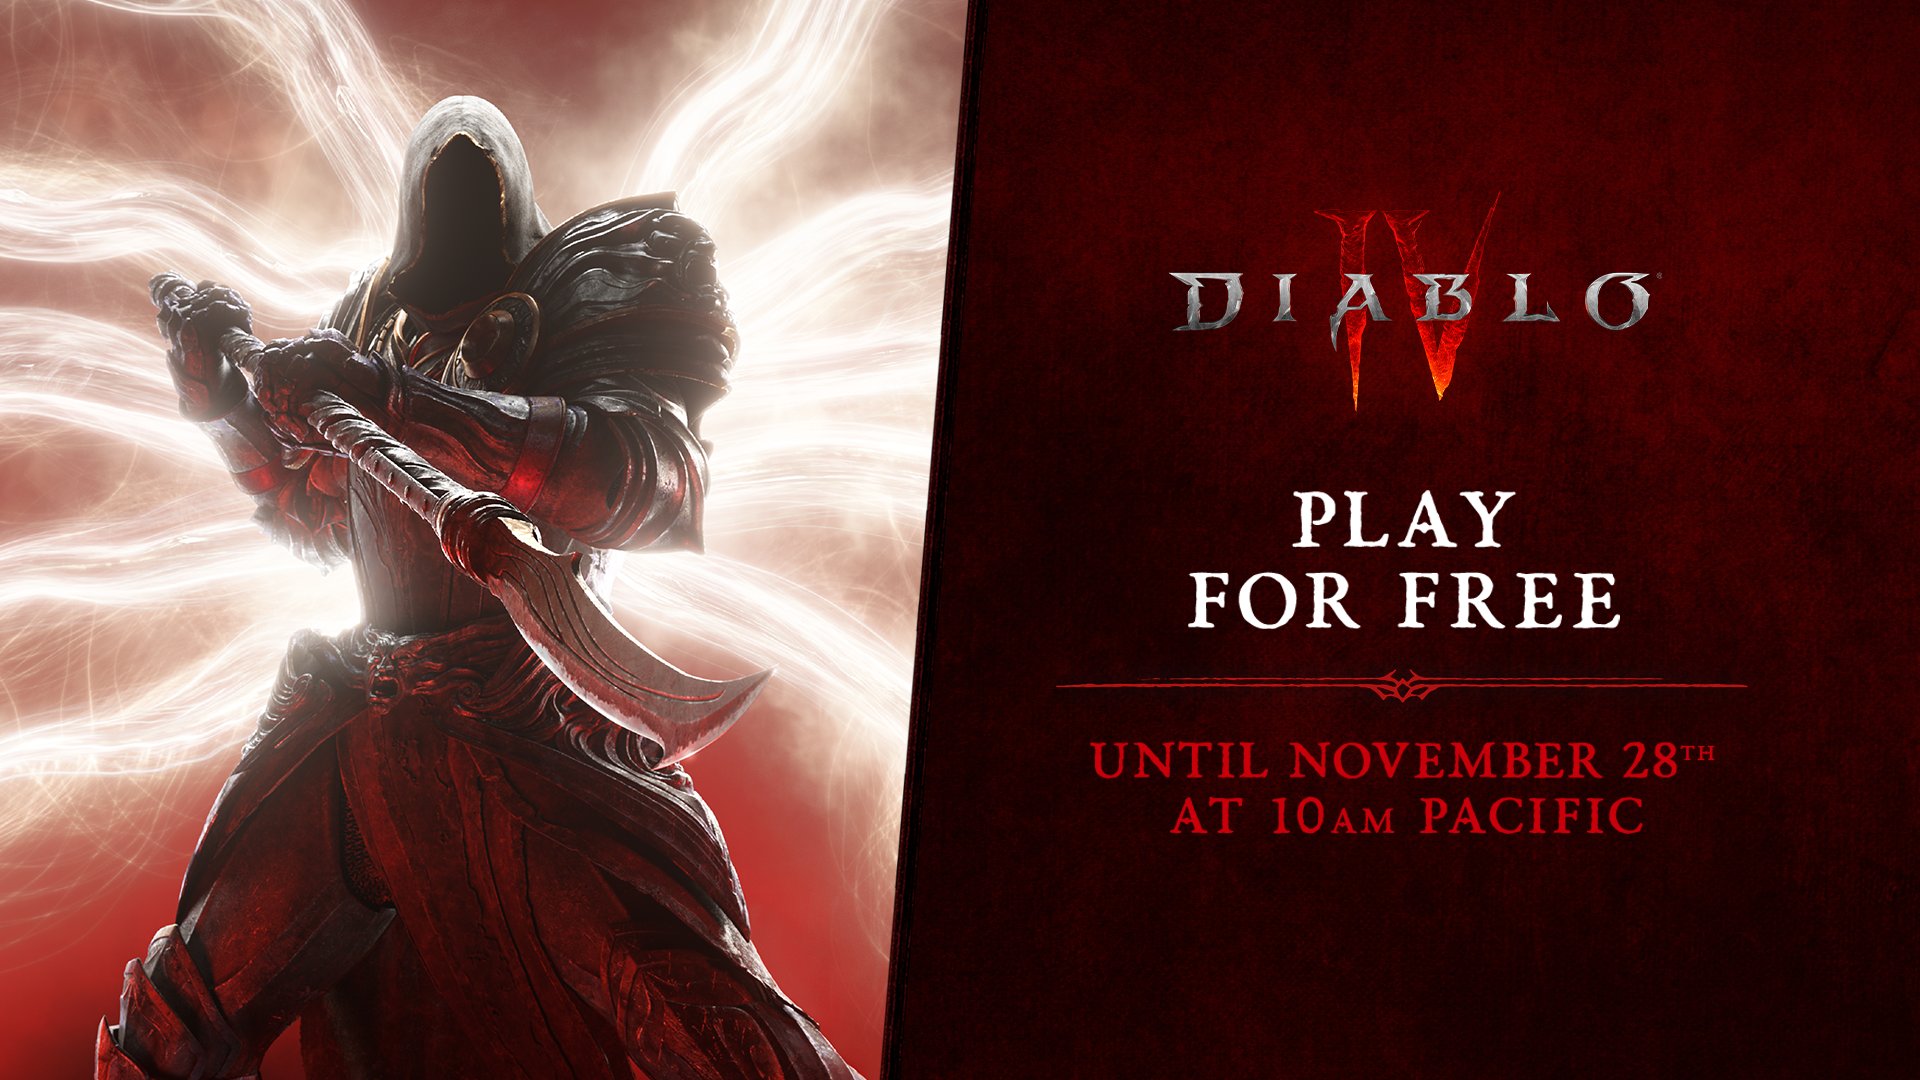 Diablo IV is currently available to play for free on Steam